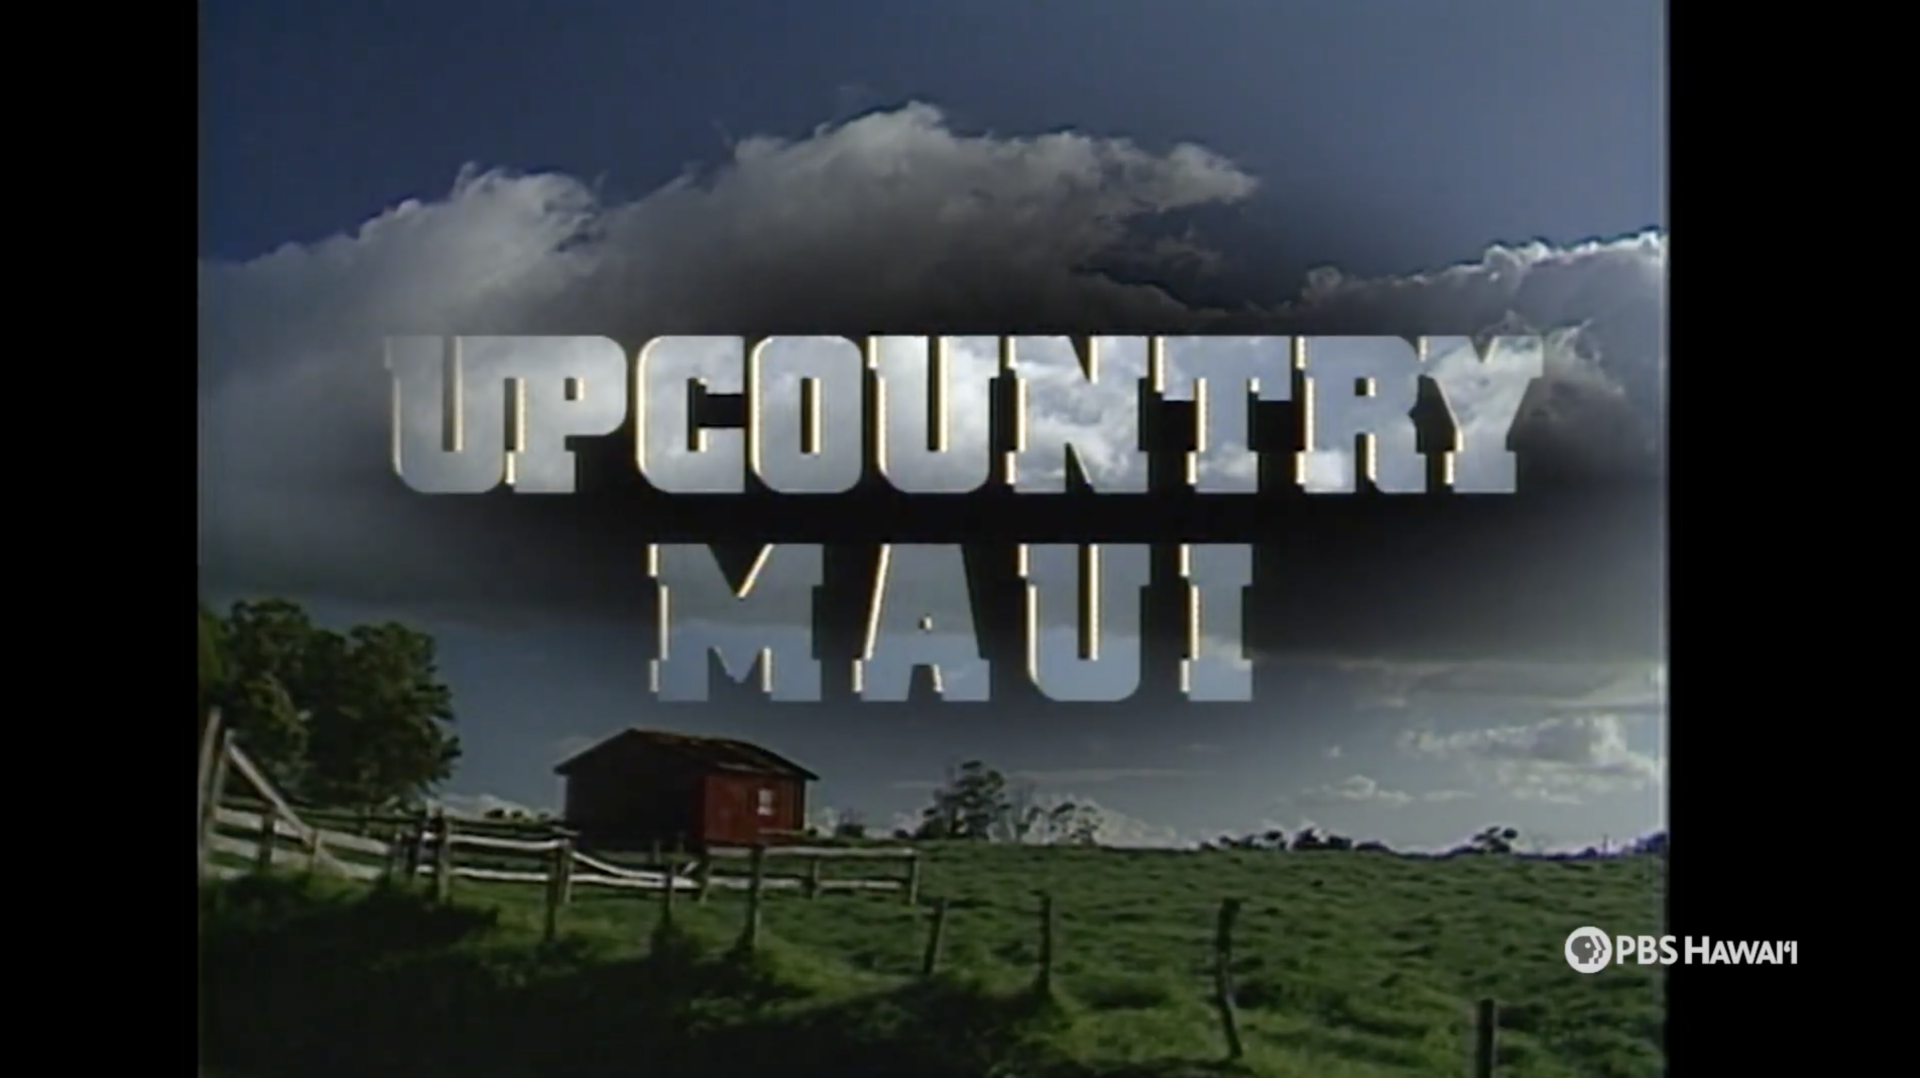 PBS HAWAIʻI CLASSICS <br/>Stories from Upcountry Maui